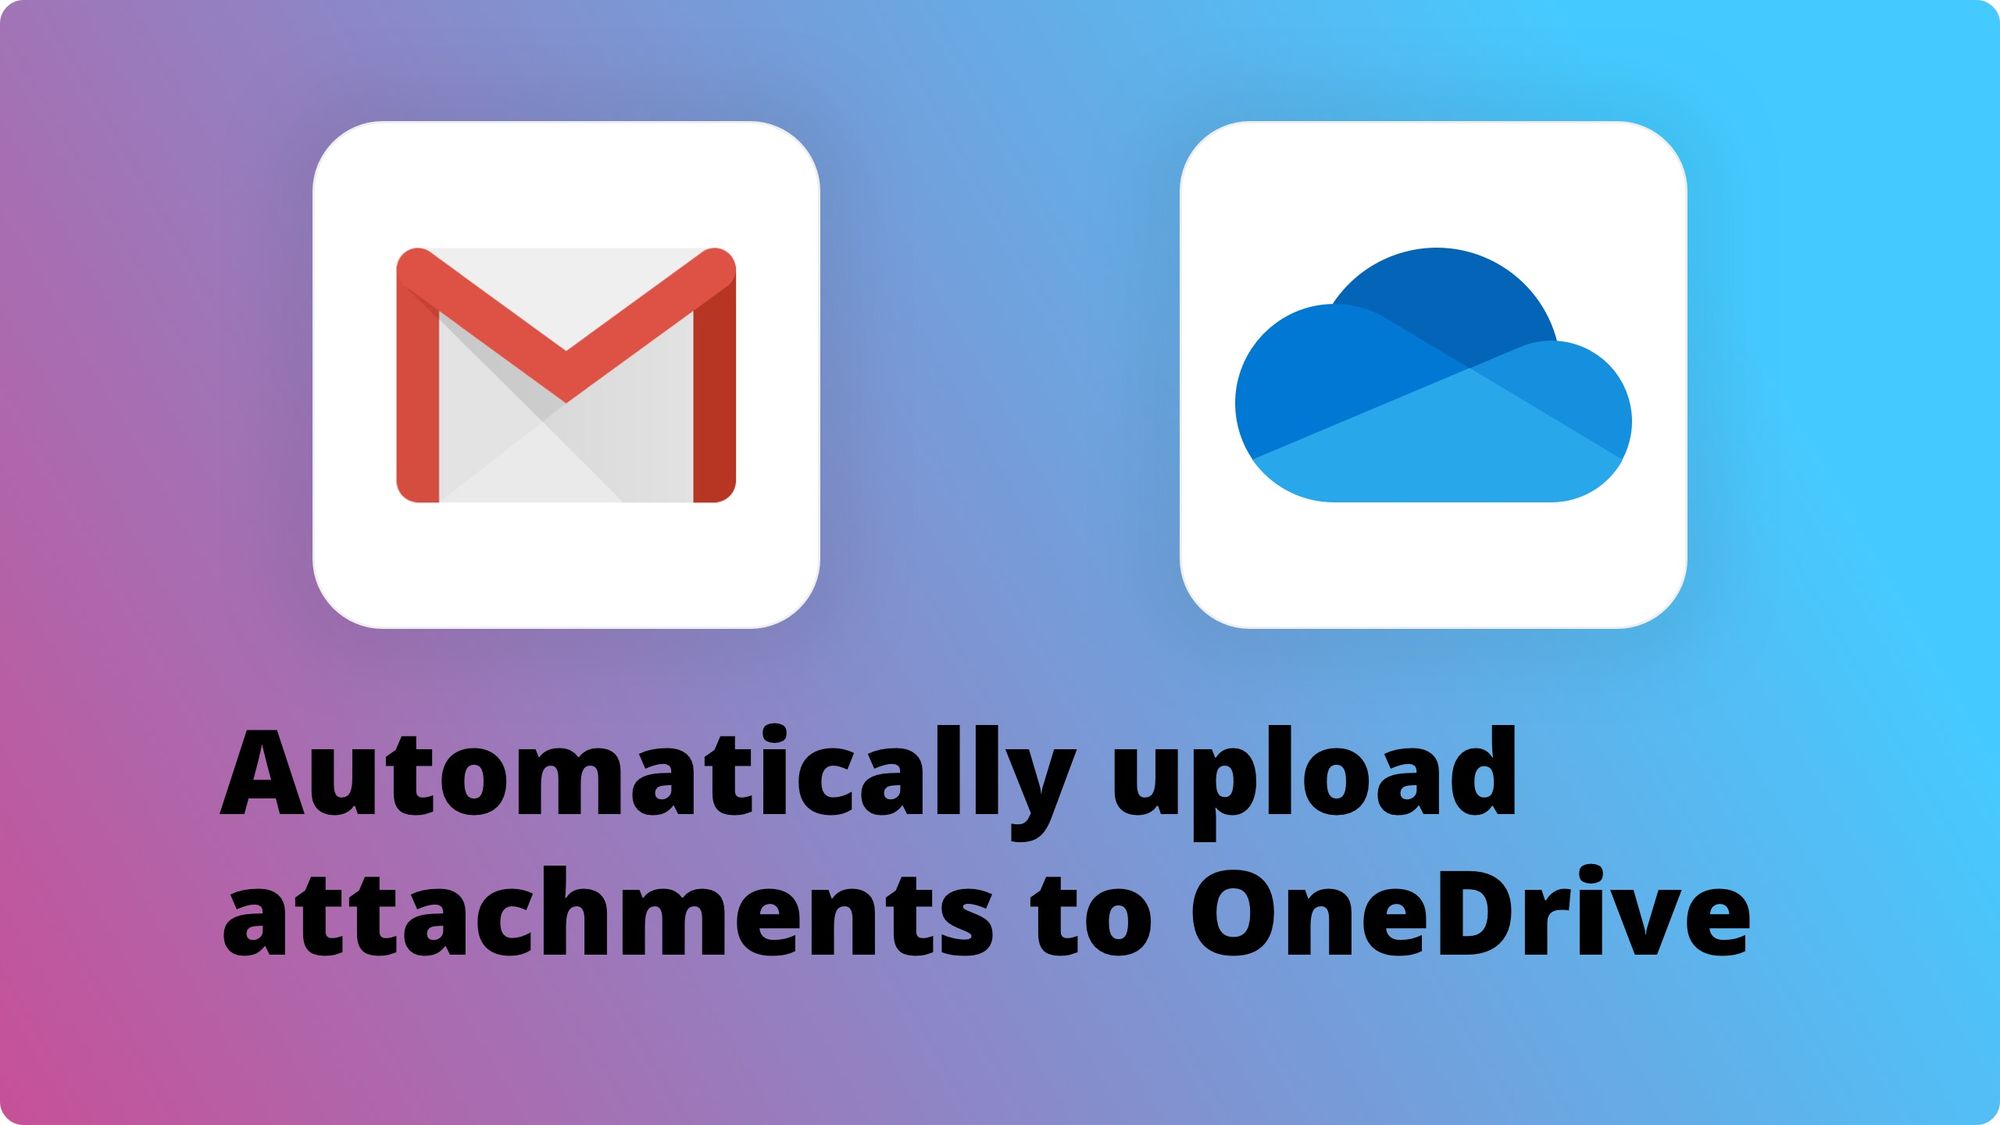 Saving Attachments Automatically to OneDrive